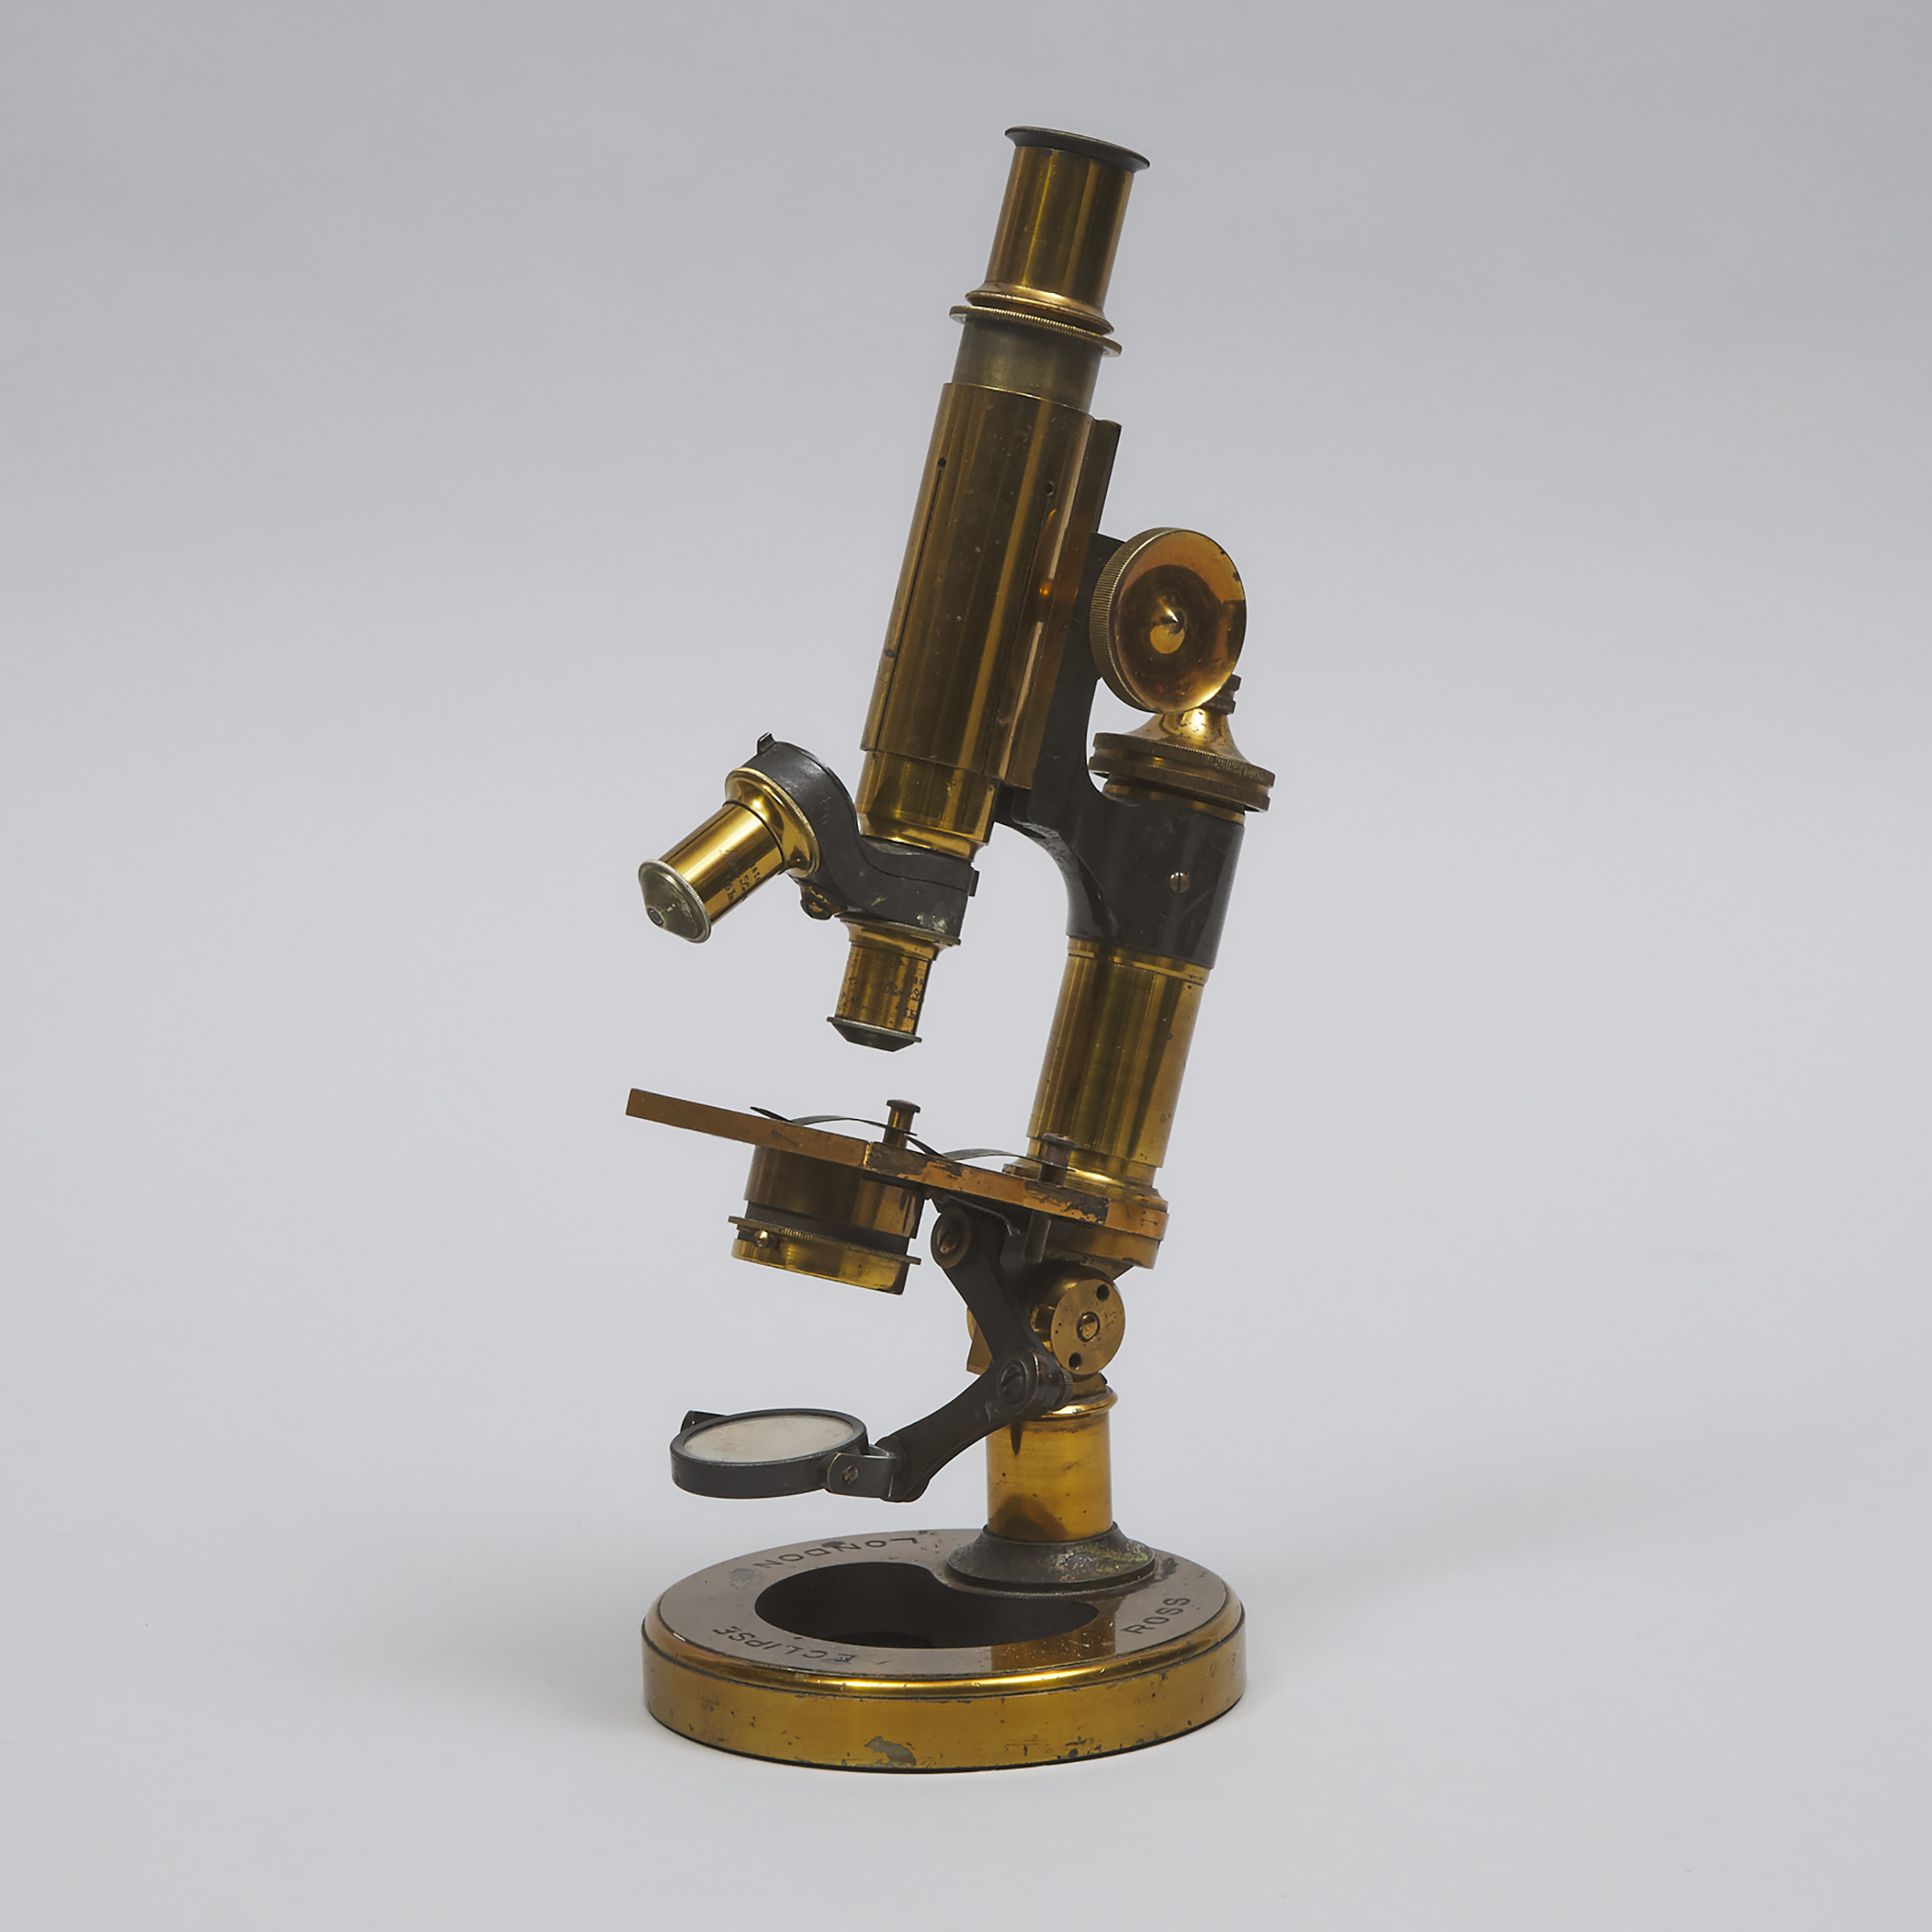 Ross & Co., 'Eclipse' Lacquered Brass Compound Monocular Microscope, London, c.1895